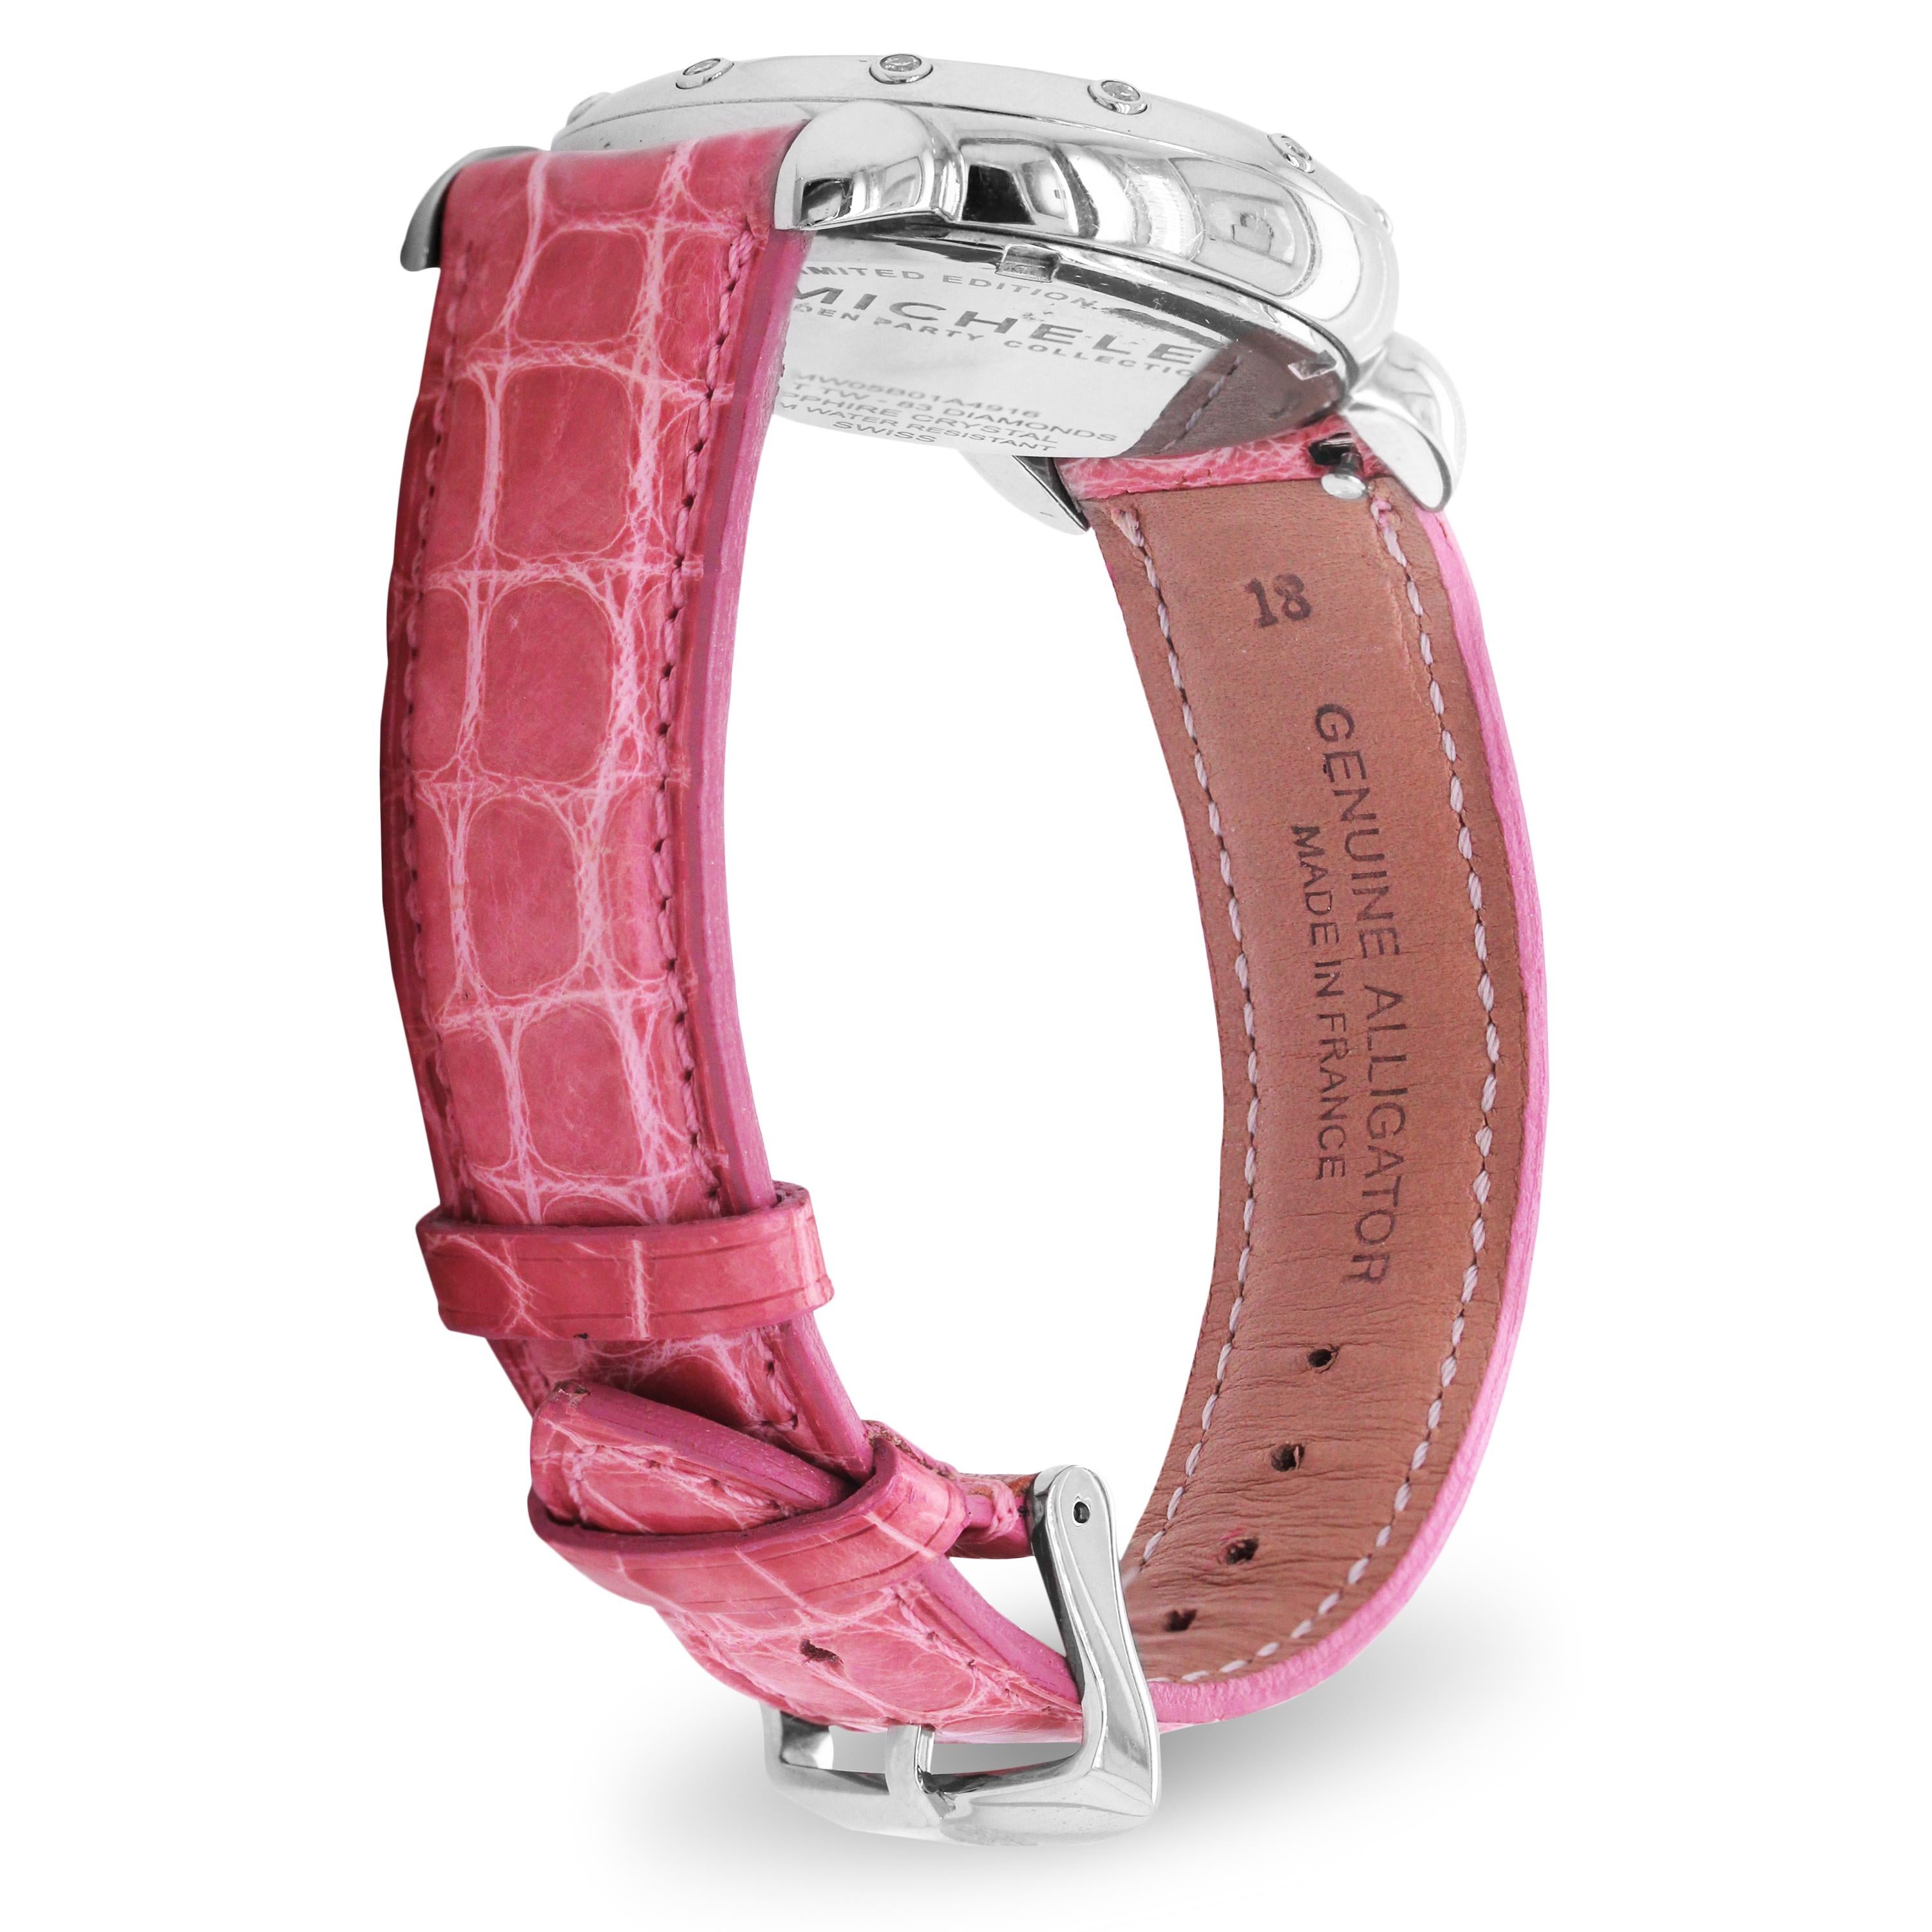 Michele Garden Party Limited Edition Ladies Watch with Alligator Skin Strap 

This incredible watch by Michele is the limited edition from the 